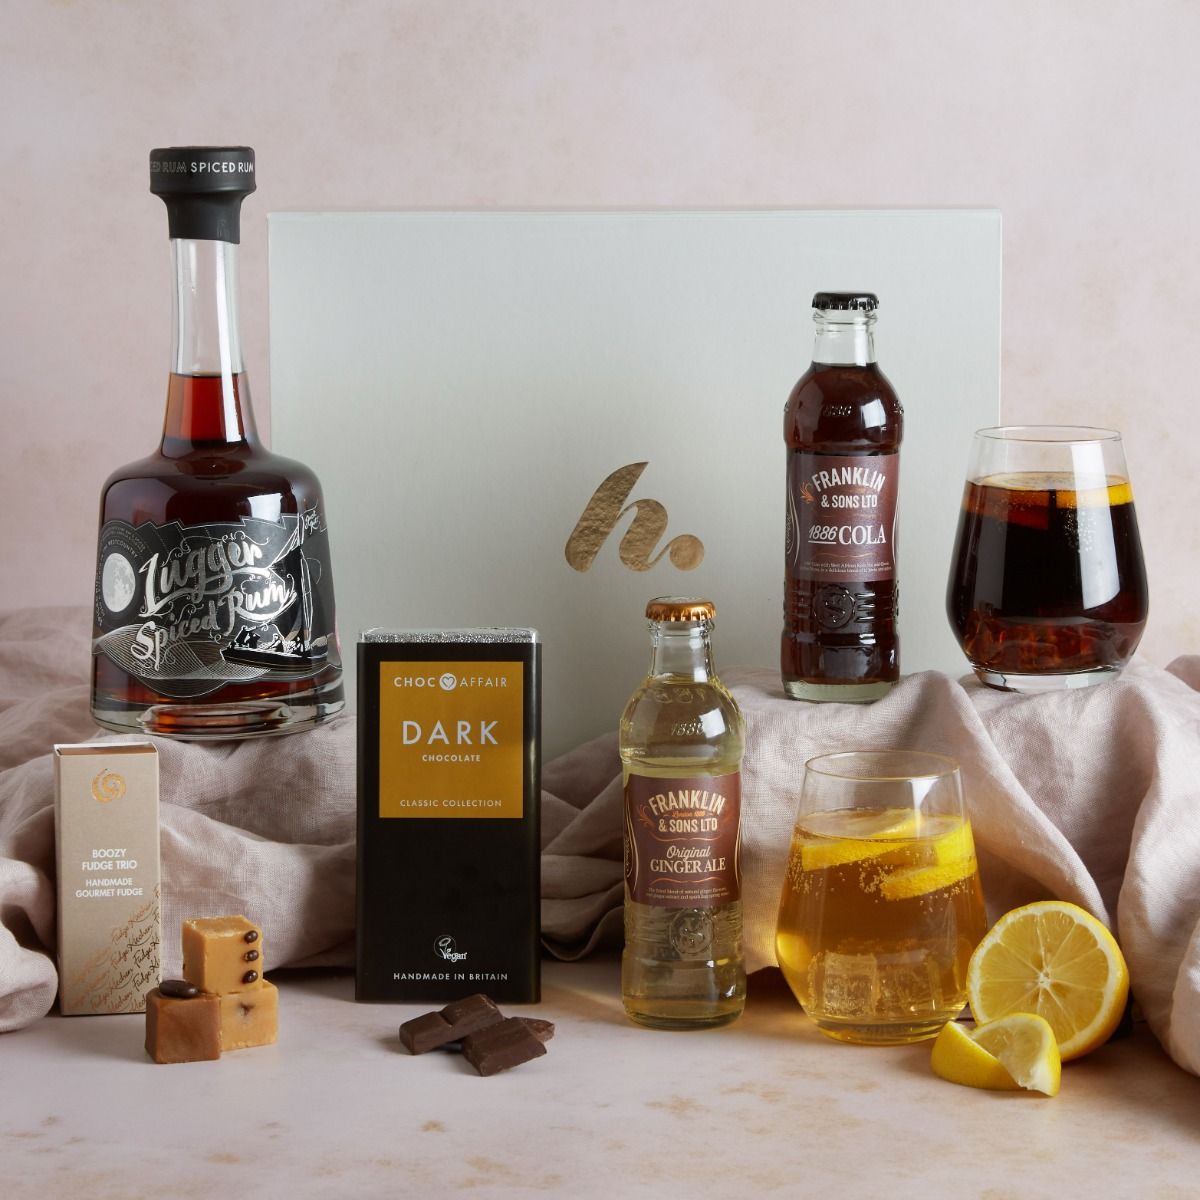 The Spiced Rum and Dark Chocolate Hamper with contents on display